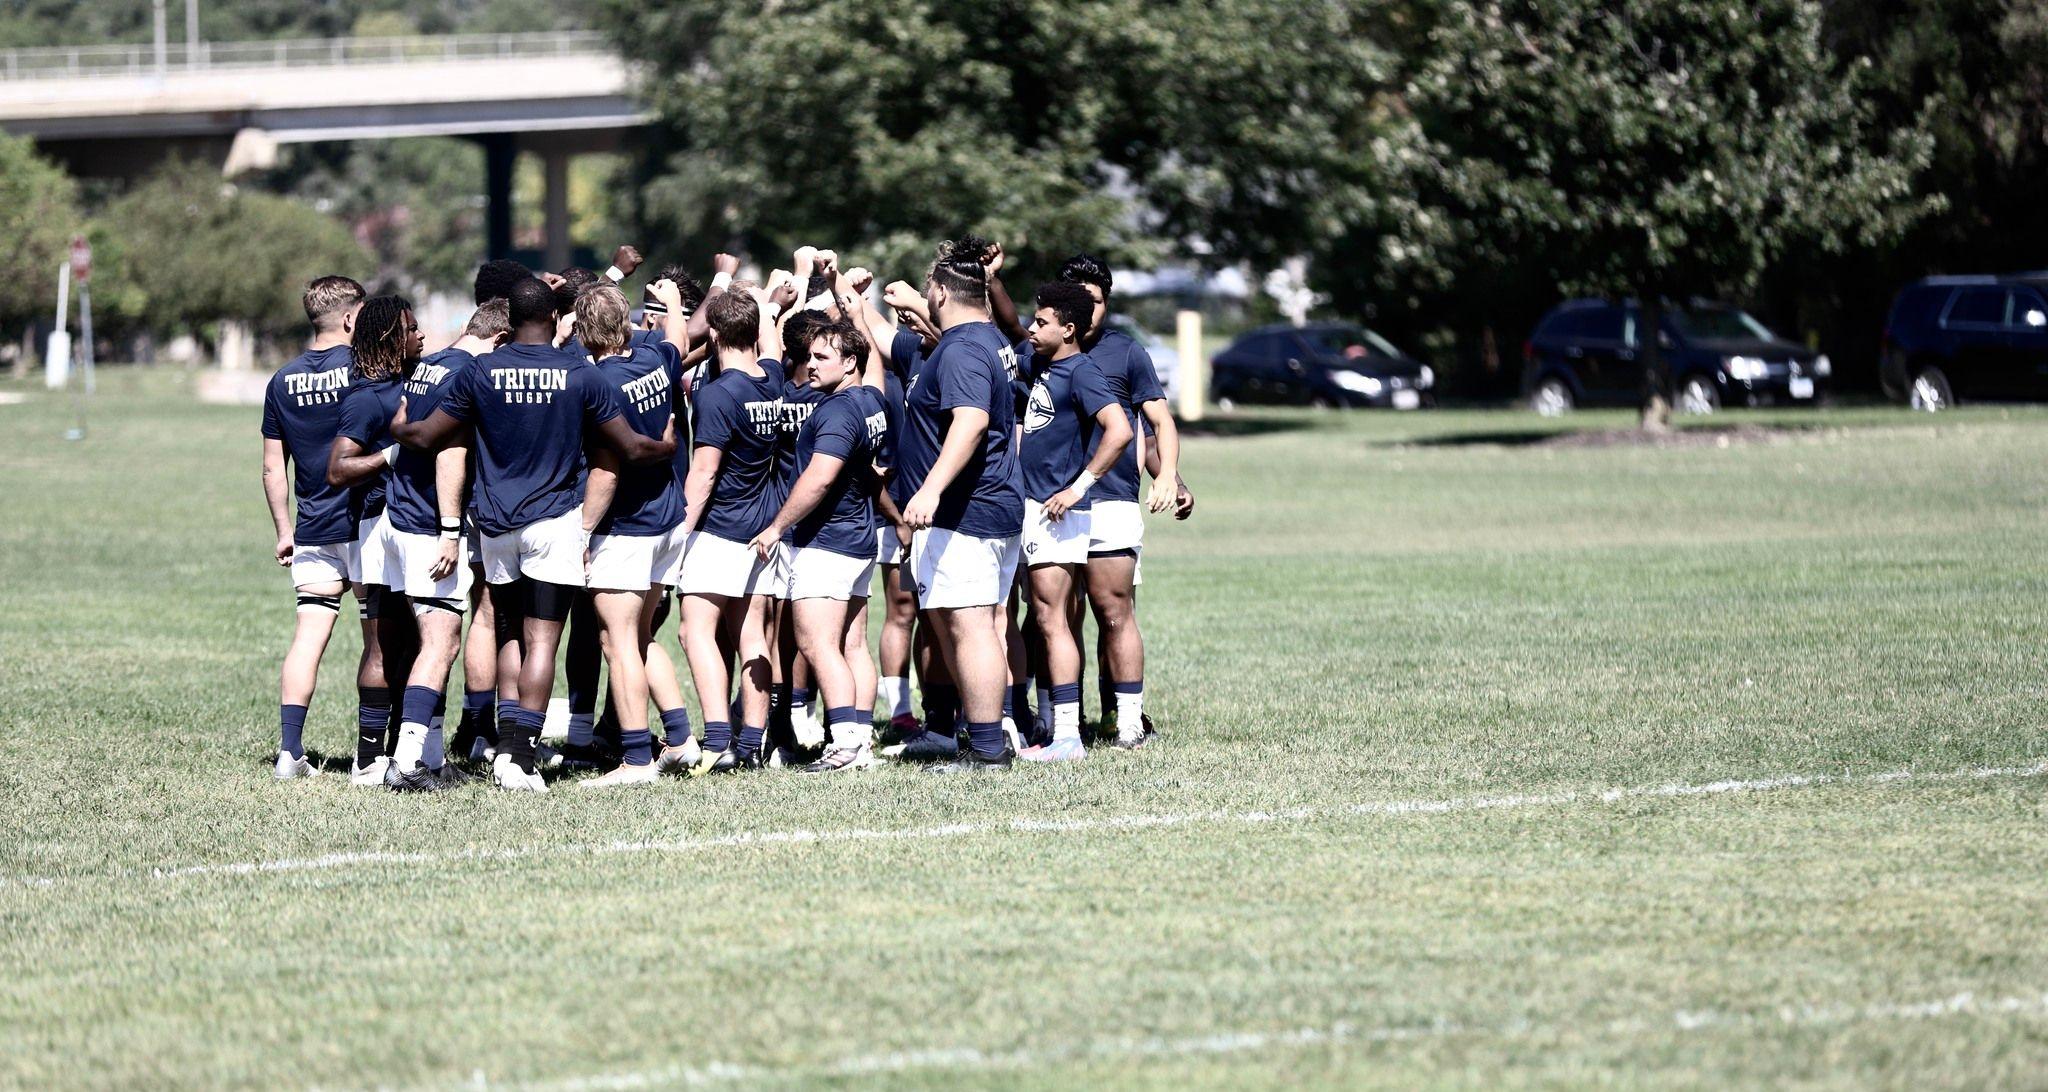 Triton rugby adds conference play